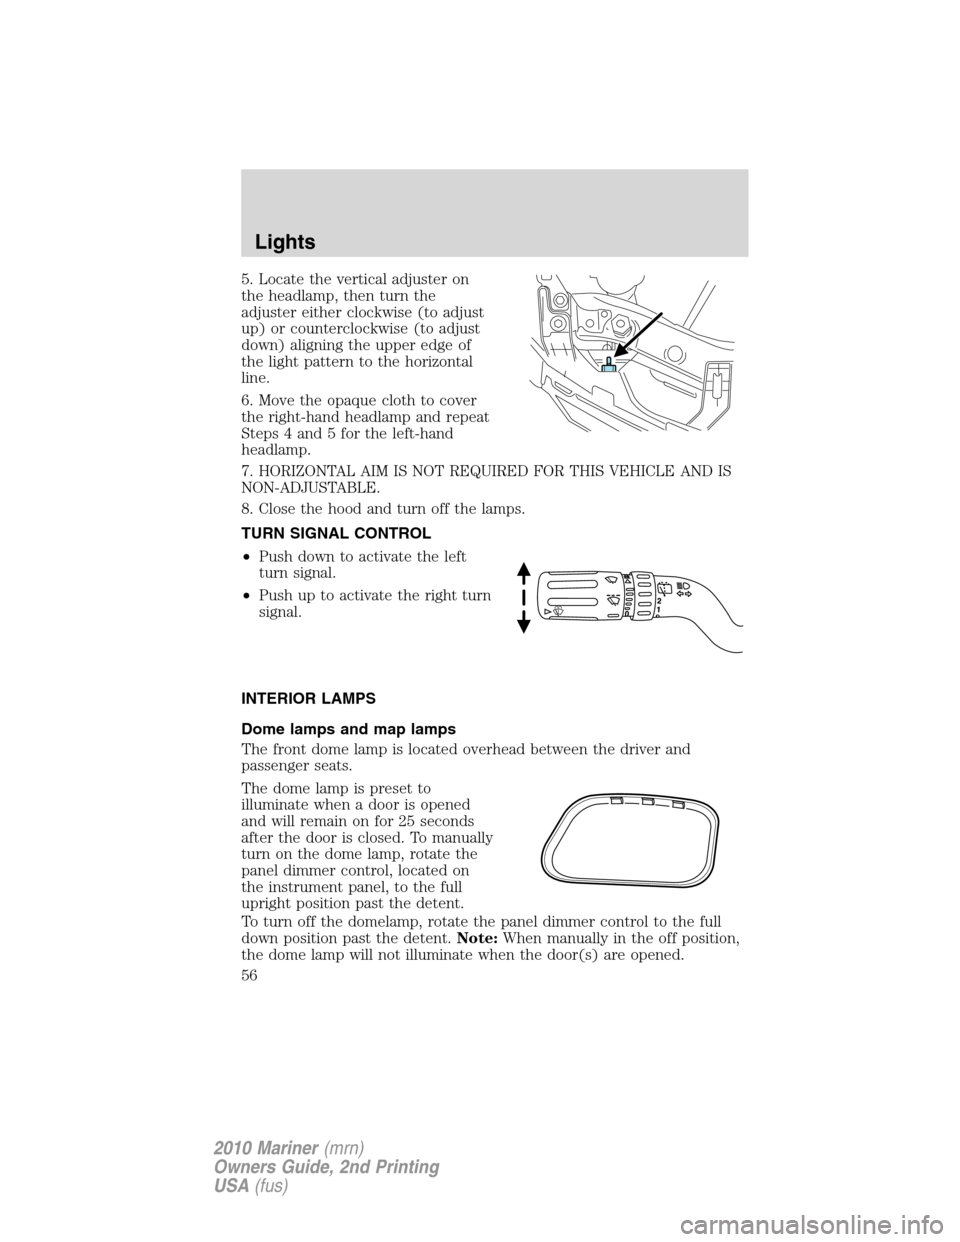 Mercury Mariner 2010  Owners Manuals 5. Locate the vertical adjuster on
the headlamp, then turn the
adjuster either clockwise (to adjust
up) or counterclockwise (to adjust
down) aligning the upper edge of
the light pattern to the horizon